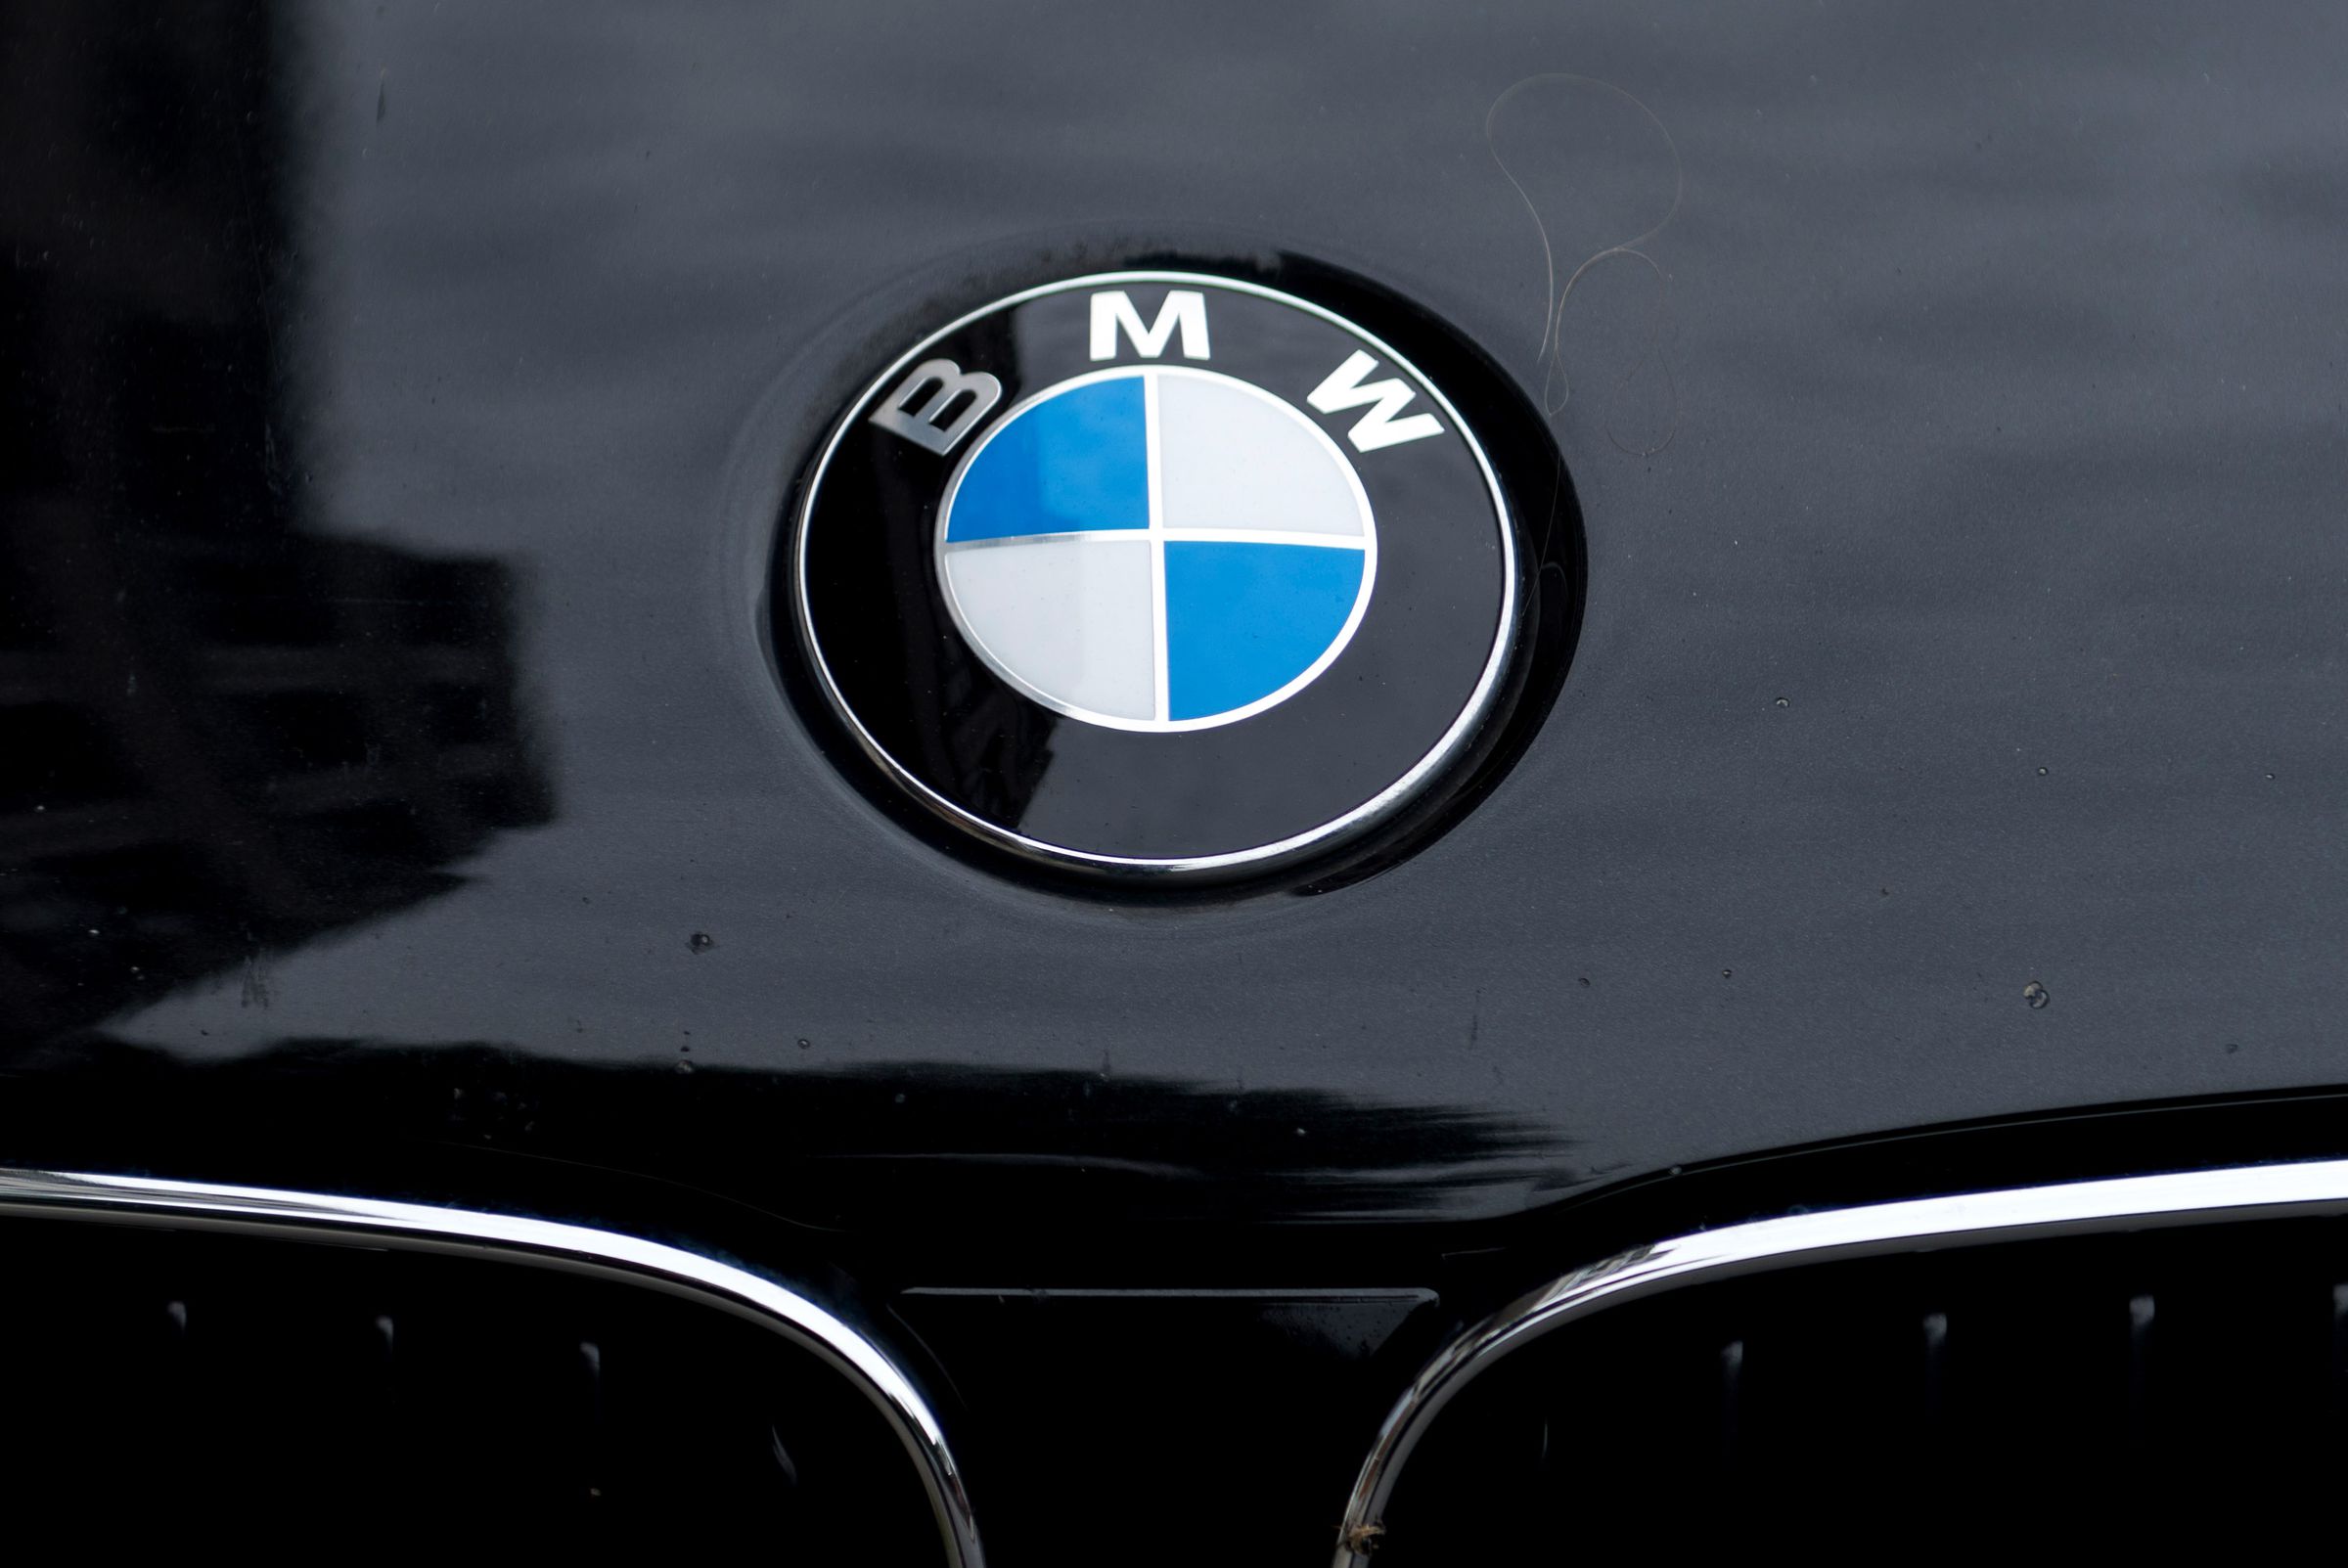 Daimler, BMW And Volkswagen Accused In Cartel Scandal